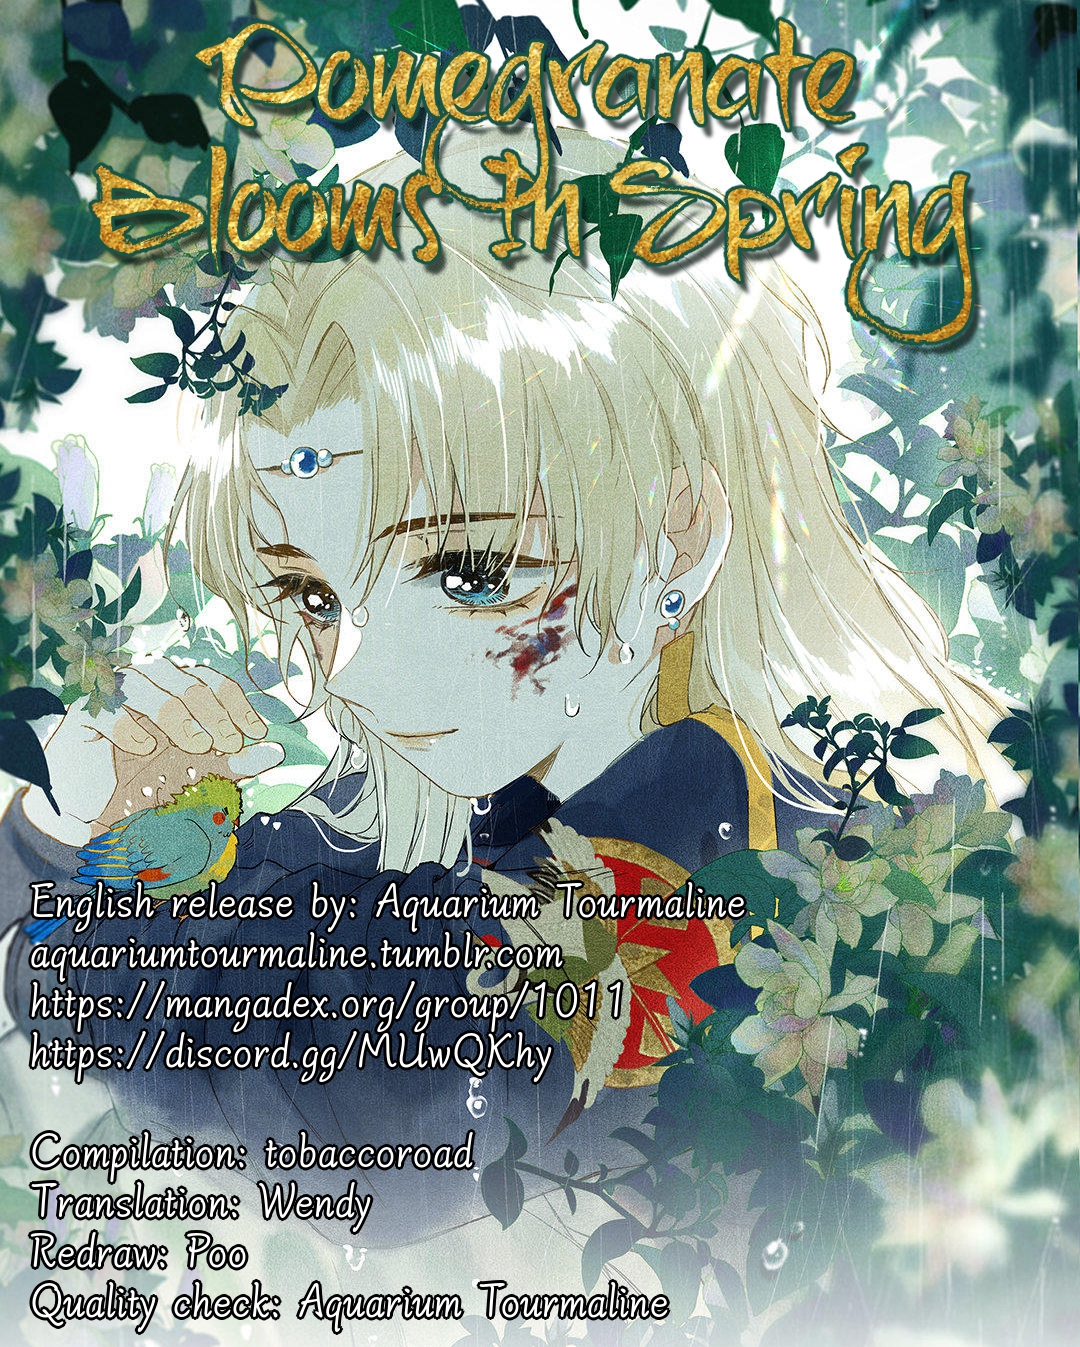 Pomegranate Blooms in Spring Ch. 0 Prologue